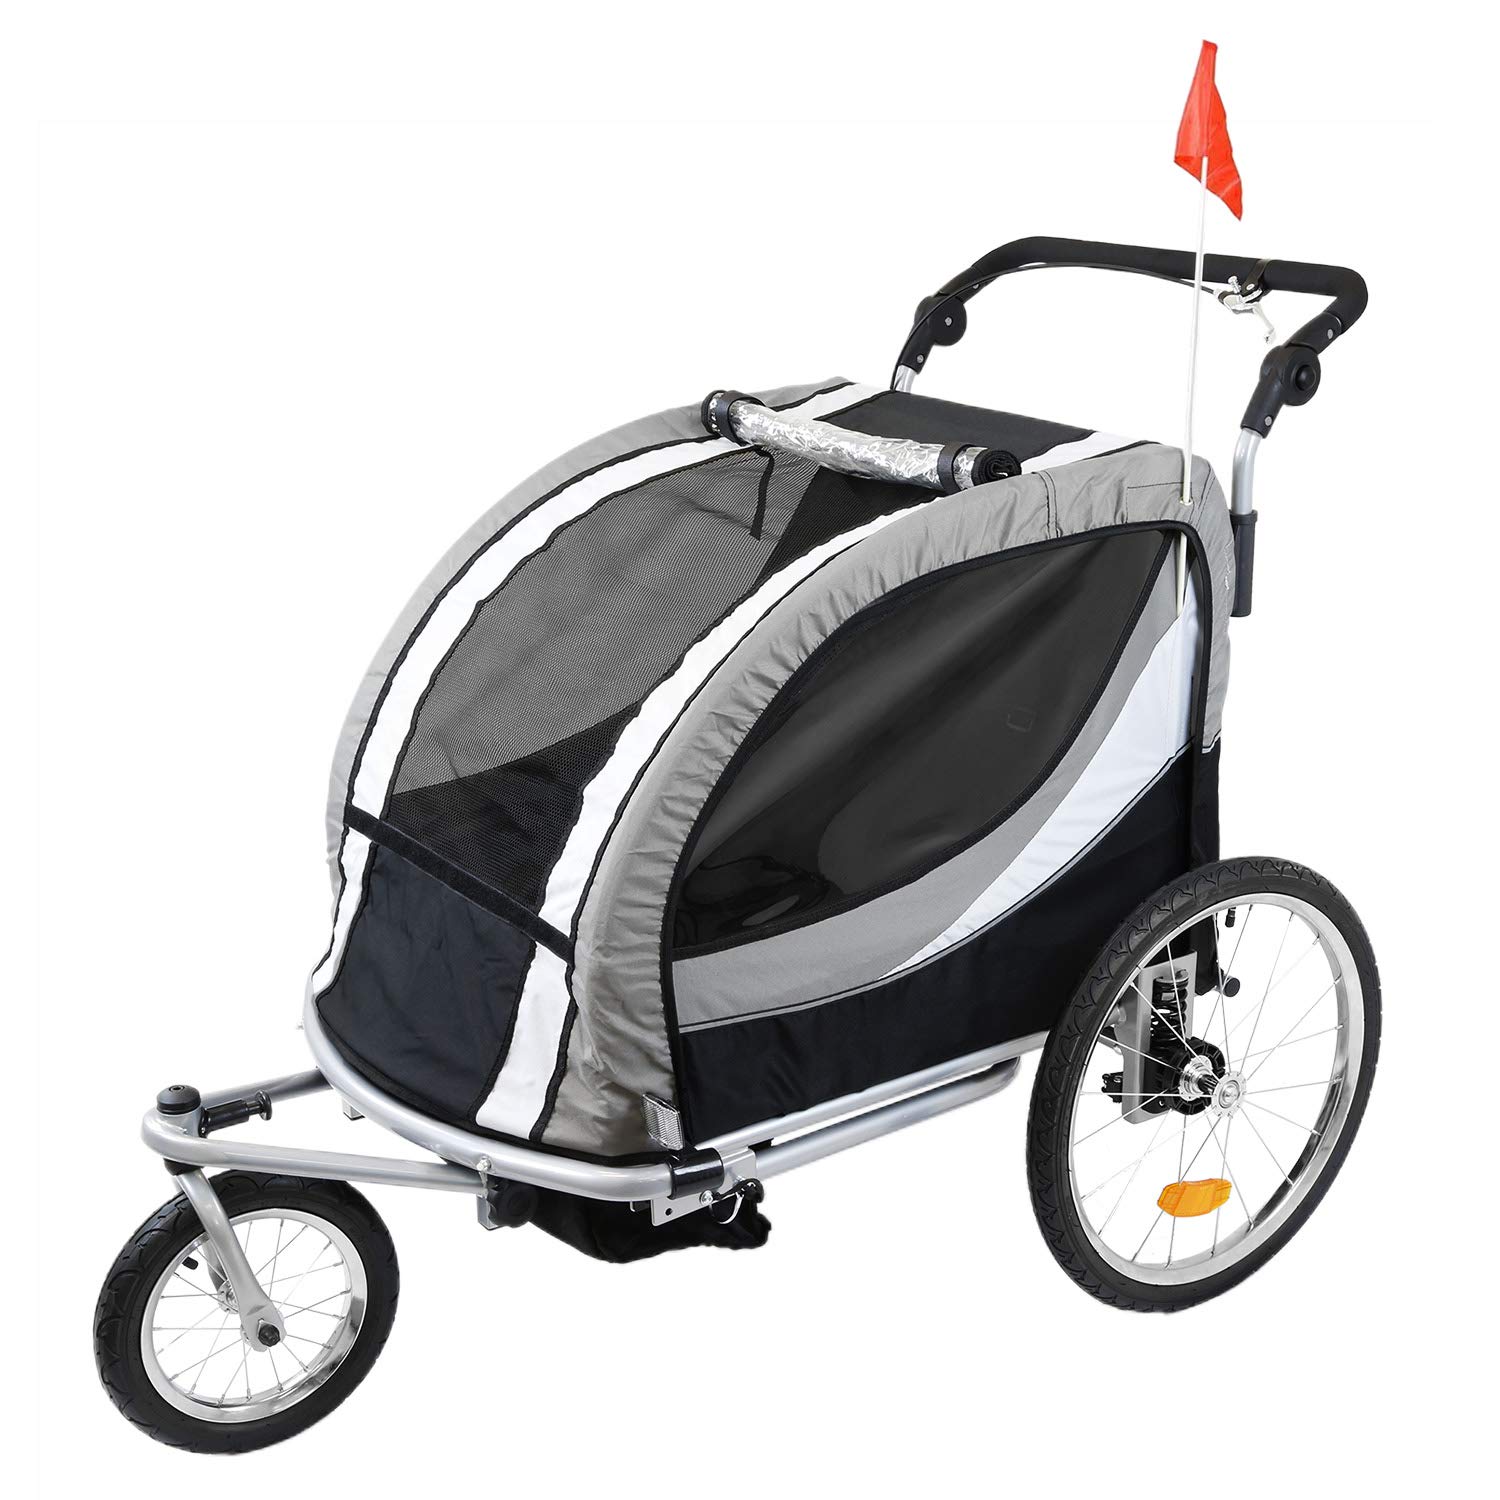 Clevr 3-in-1 Collapsible 2 Seat Double Bicycle Trailer Baby Bike Jogger/Stroller Jogging Running Kids Cart | Pivot Front Wheel